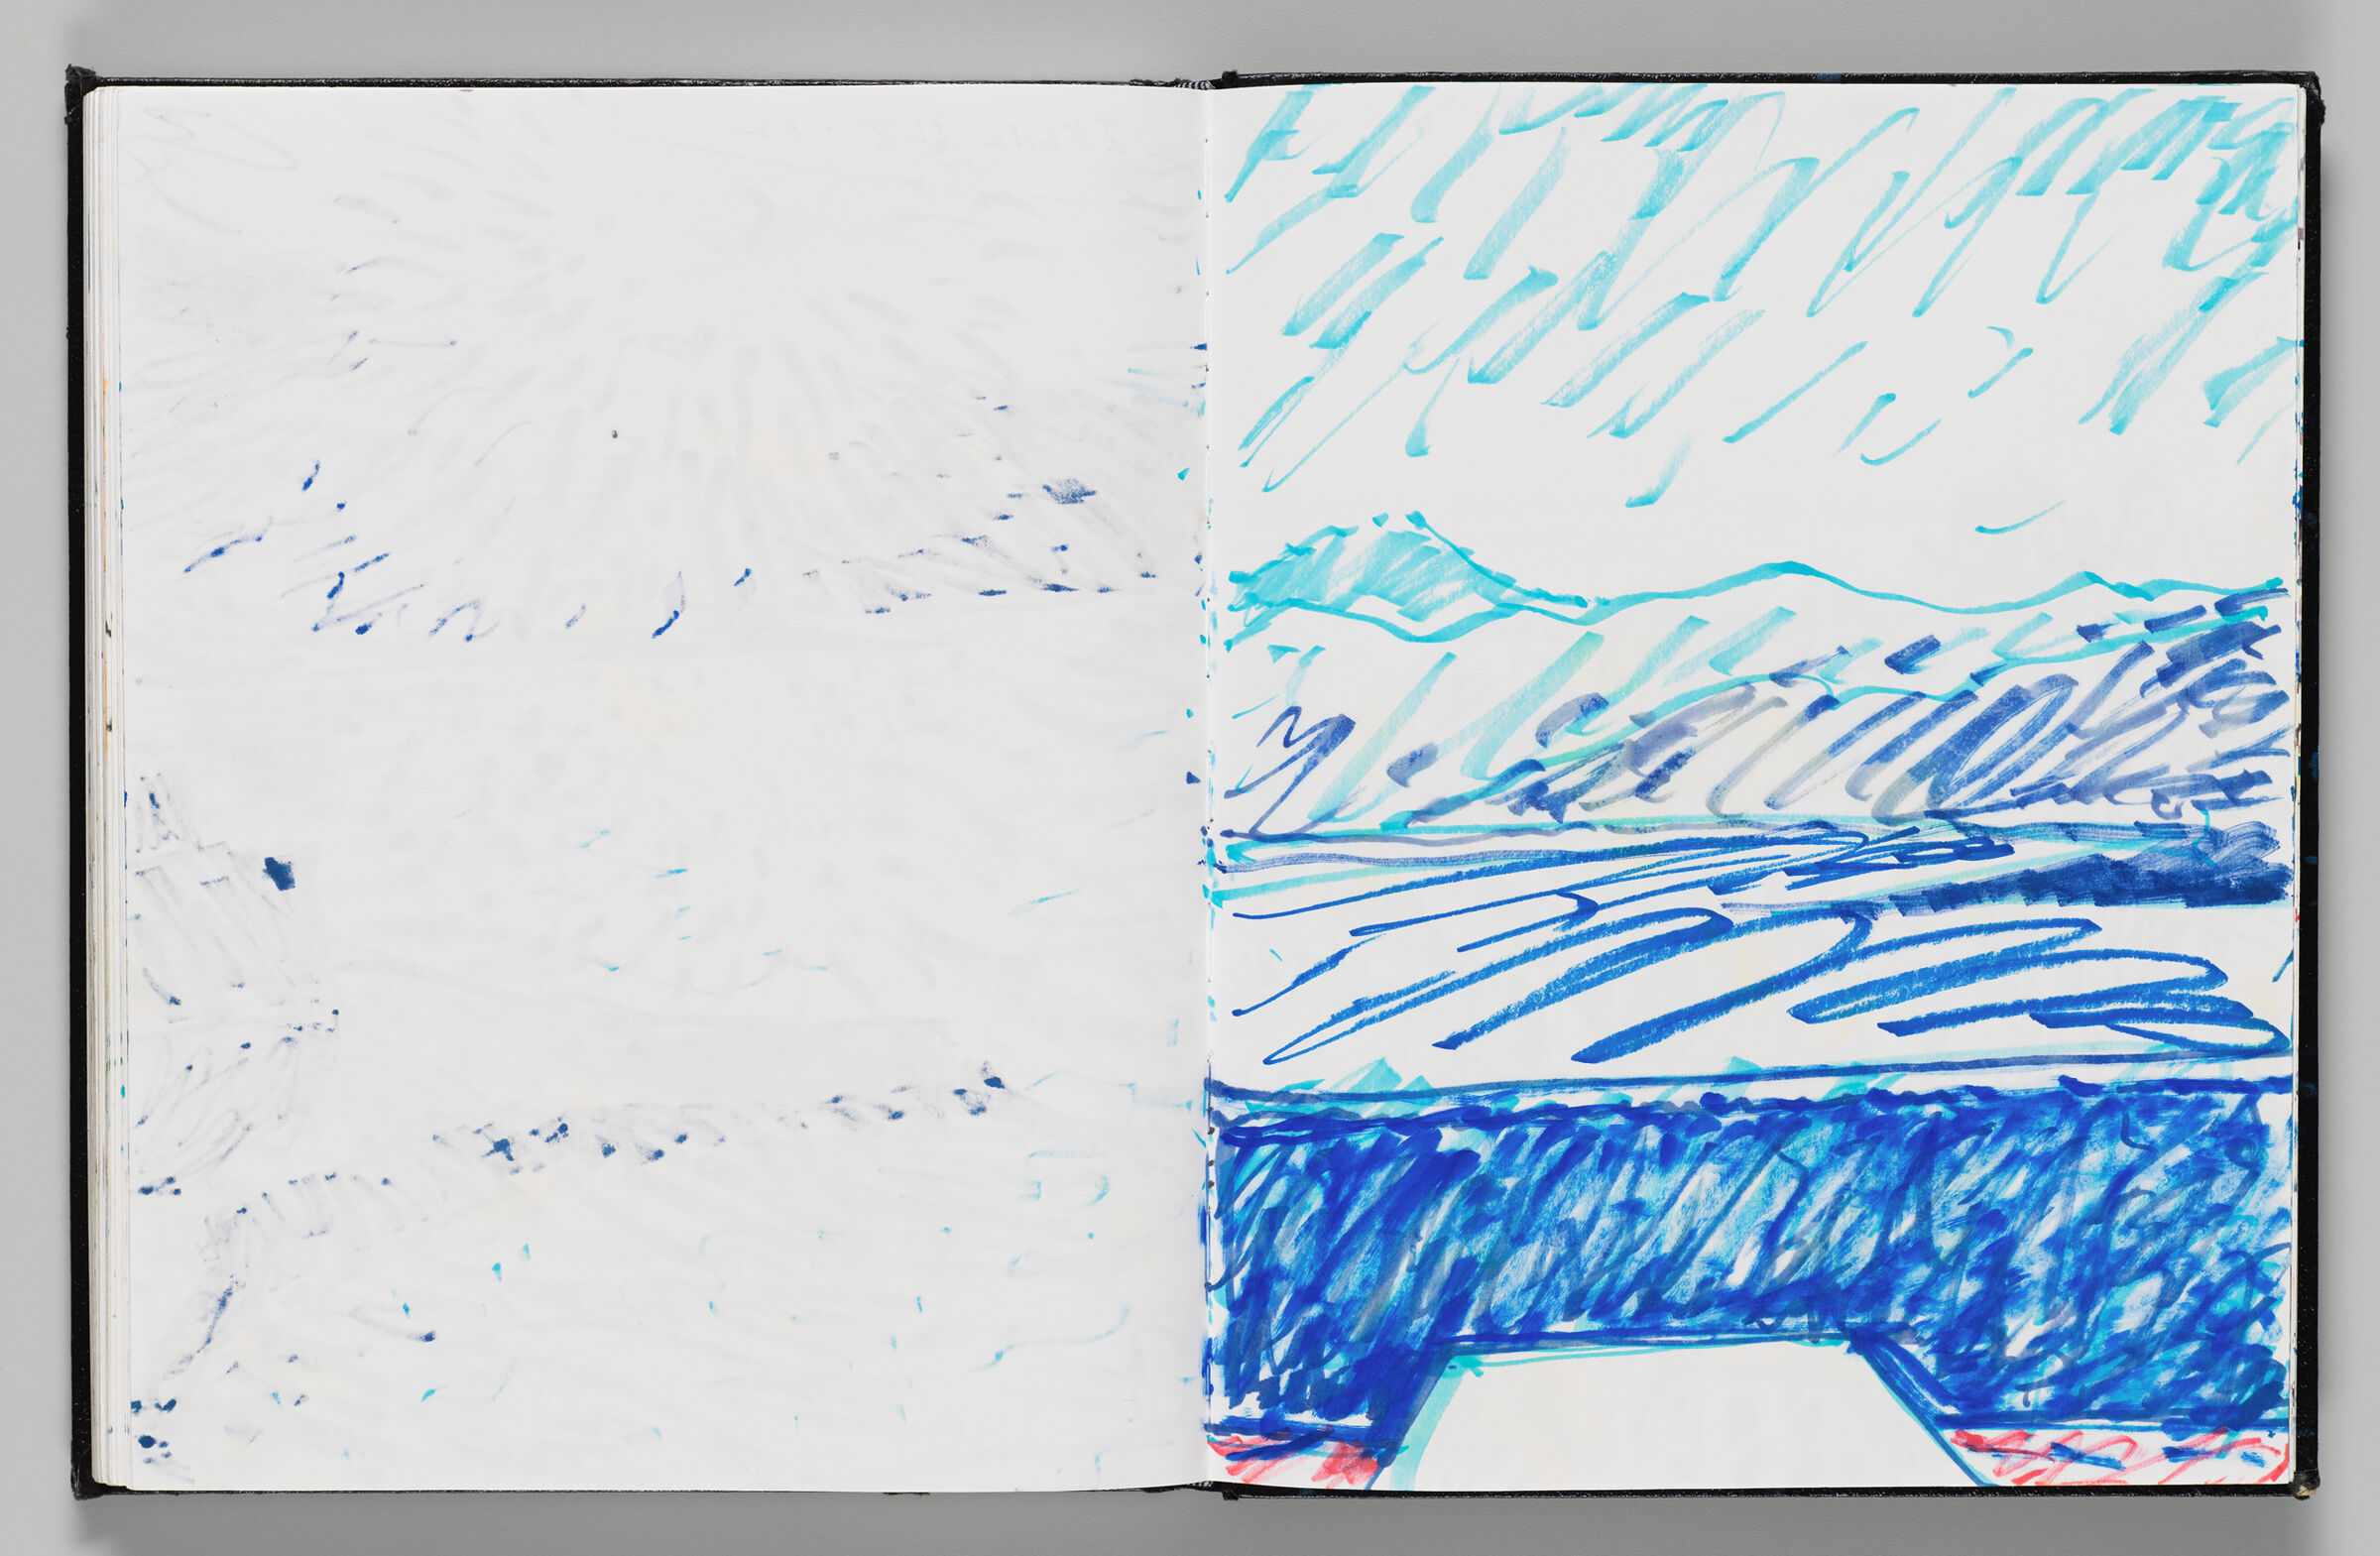 Untitled (Bleed-Through Of Previous Page, Left Page); Untitled (Ikaria Seascape, Right Page)